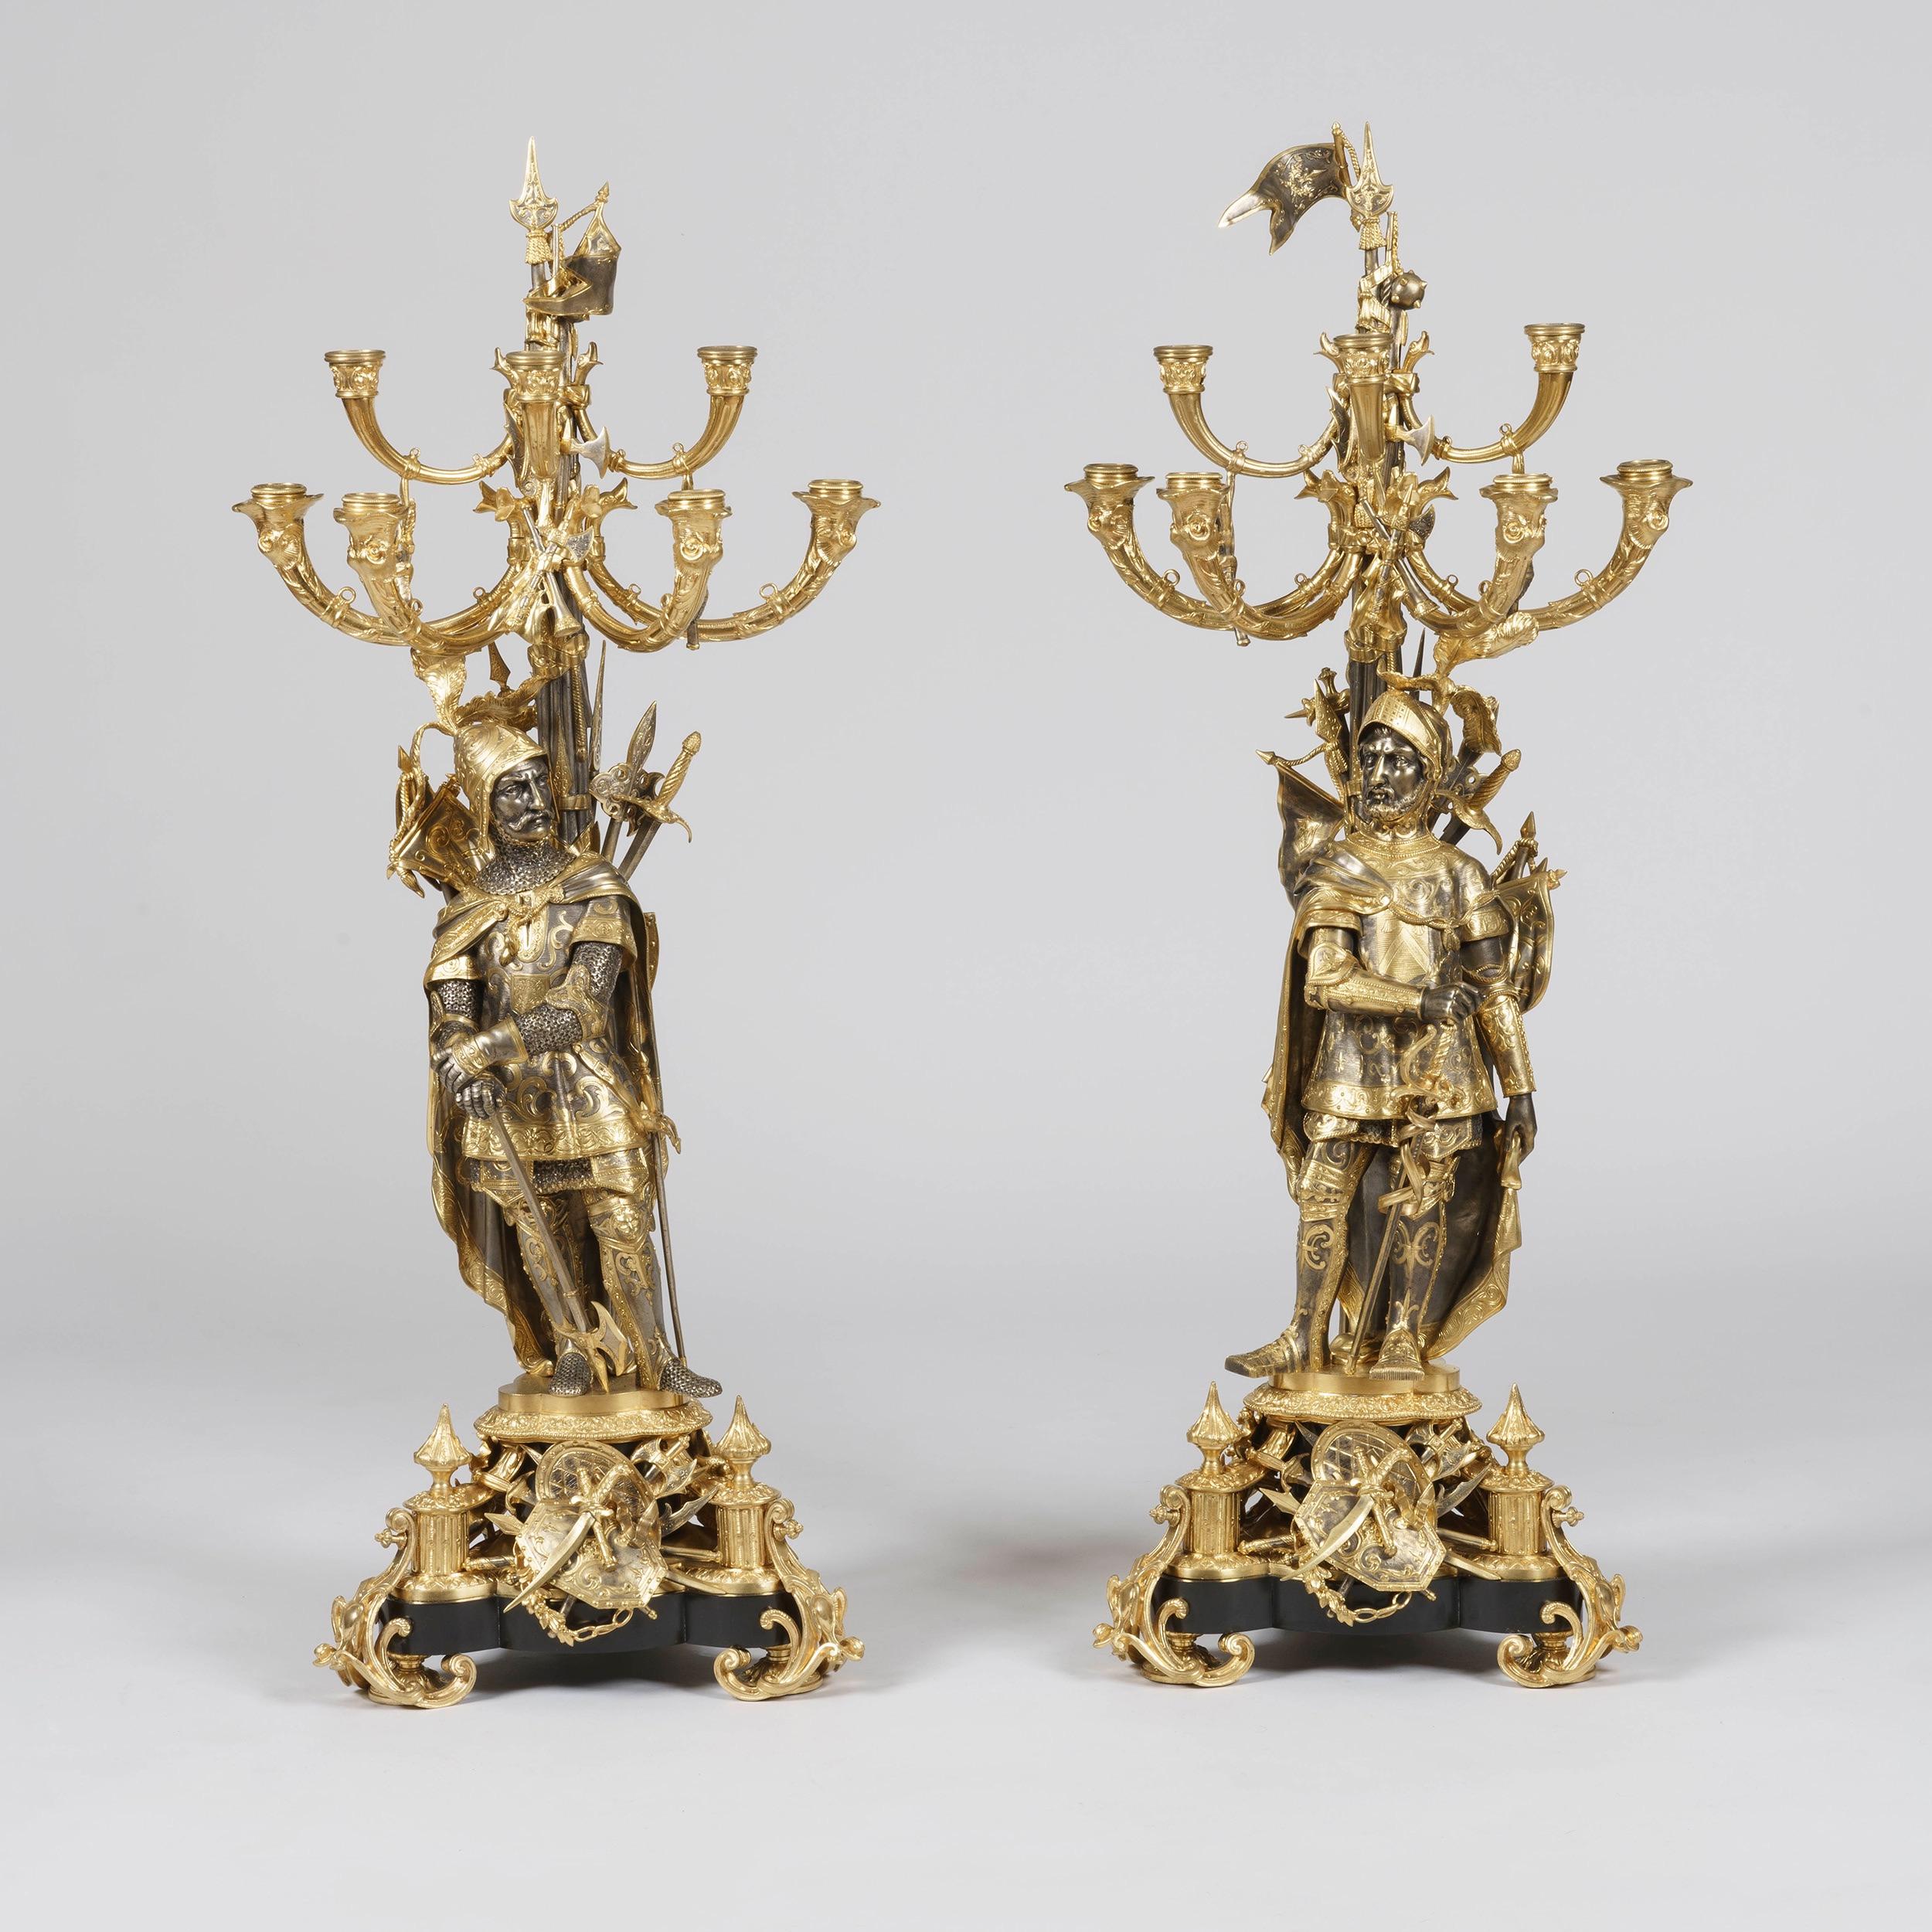 An August Pair of Napoleon III Silvered and Gilt Bronze Candelabra

Rising from sumptuous scrolling ormolu tripod bases incorporating a slate support and exquisite military regalia; the chivalrous men, one holding a sword and the other his axe,